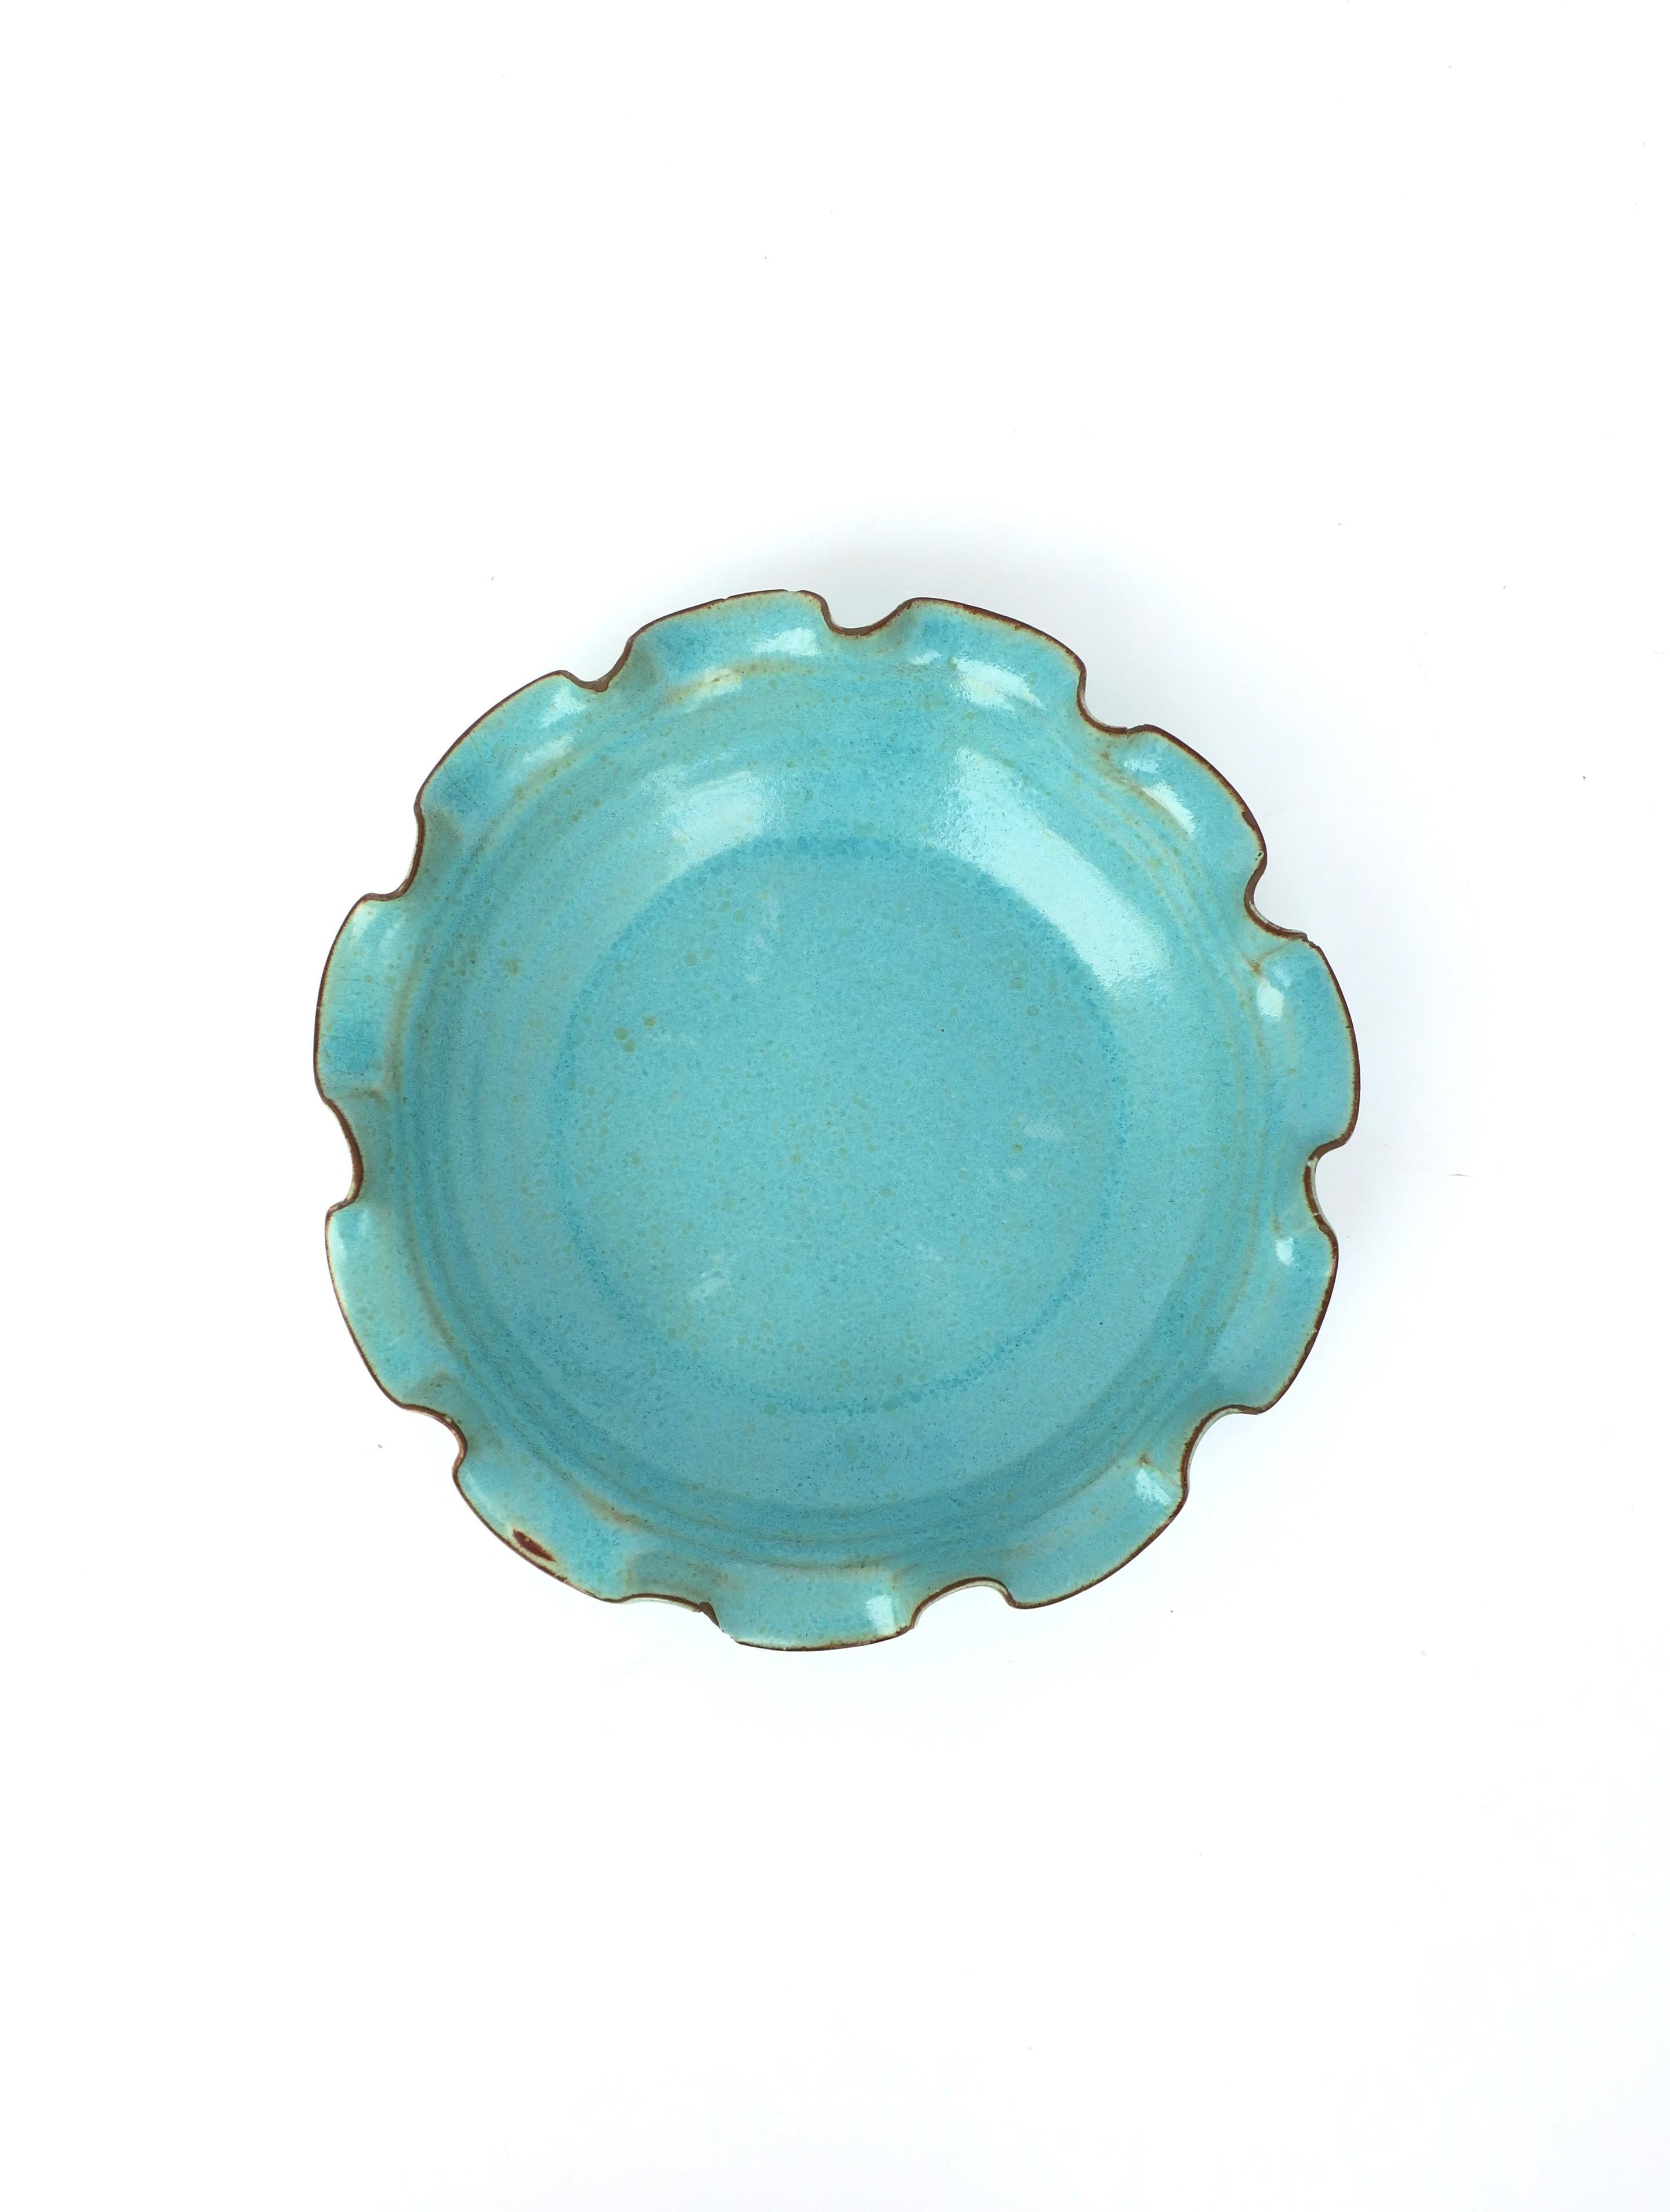 A beautiful sky-blue or turquoise blue pottery bowl with ruffled edge. Great as a standalone piece, as a catch-all, or serving bowl. Dimensions: 9.88